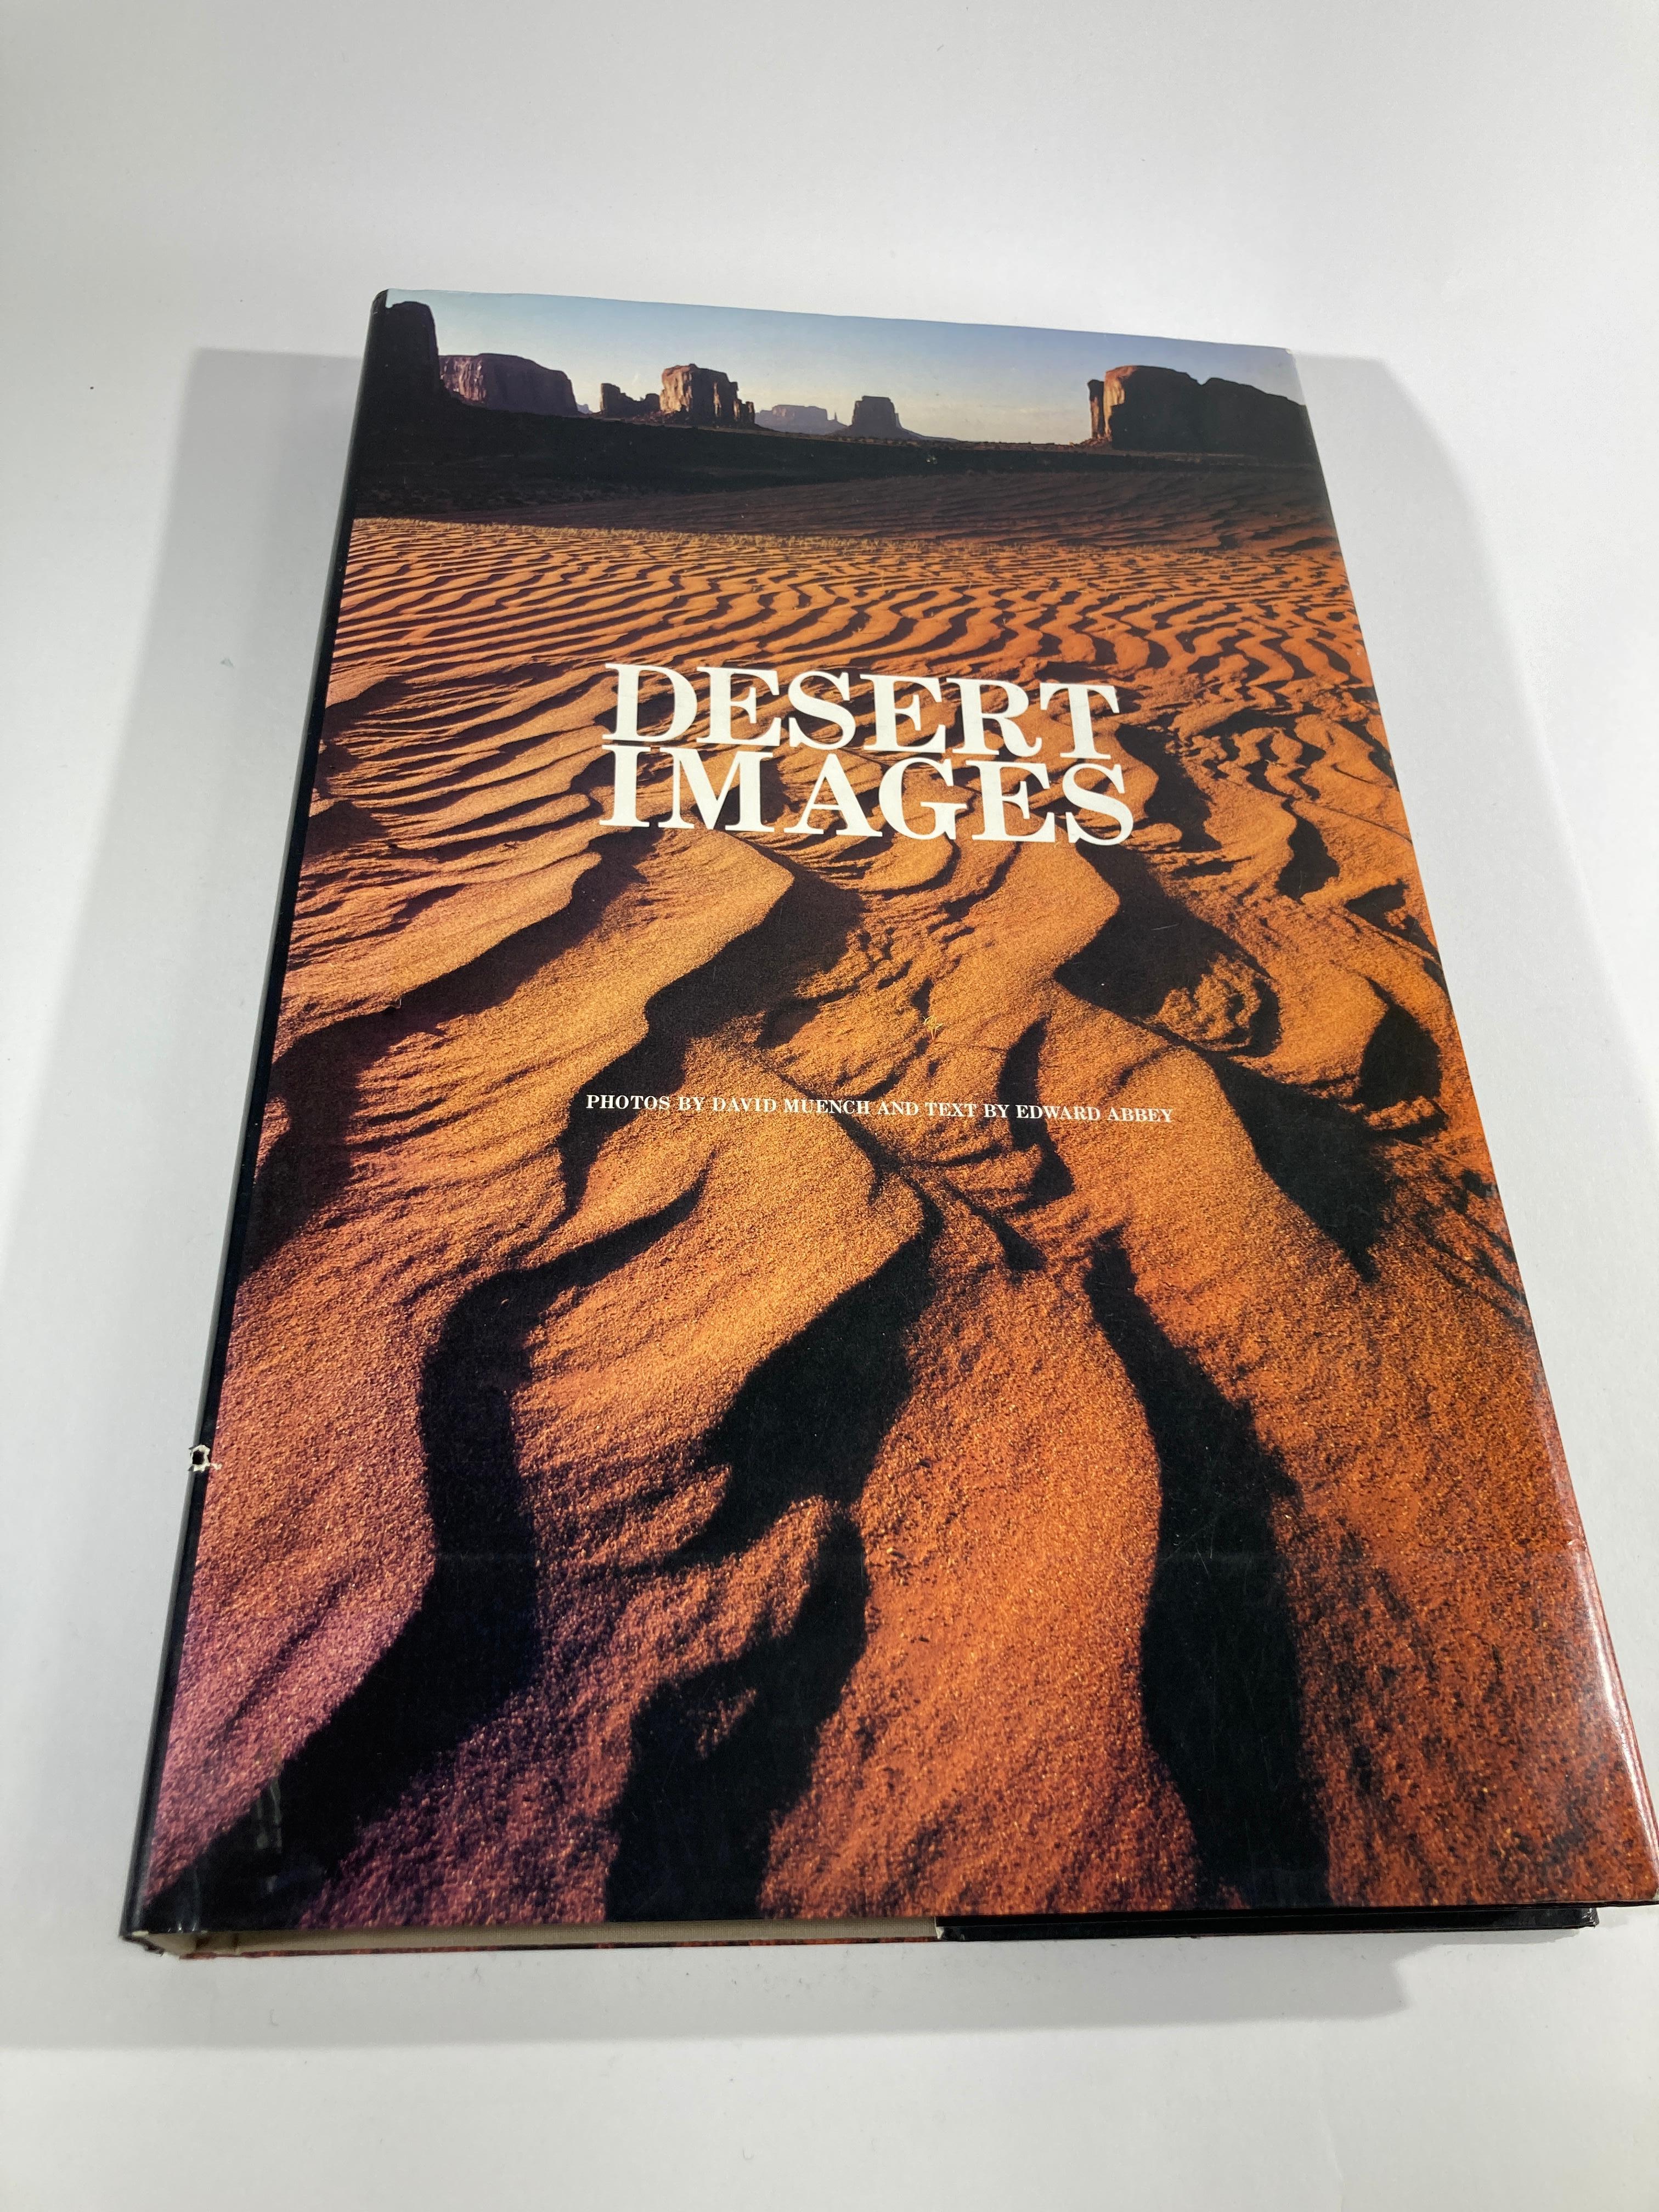 Desert images. An American Landscape by David Muench [Photos], EDWARD ABBEY [Text].
David Muench's large scale color photos of the American Southwest's desert beauties and natural wonders are accompanied by nature writing from the renowned author